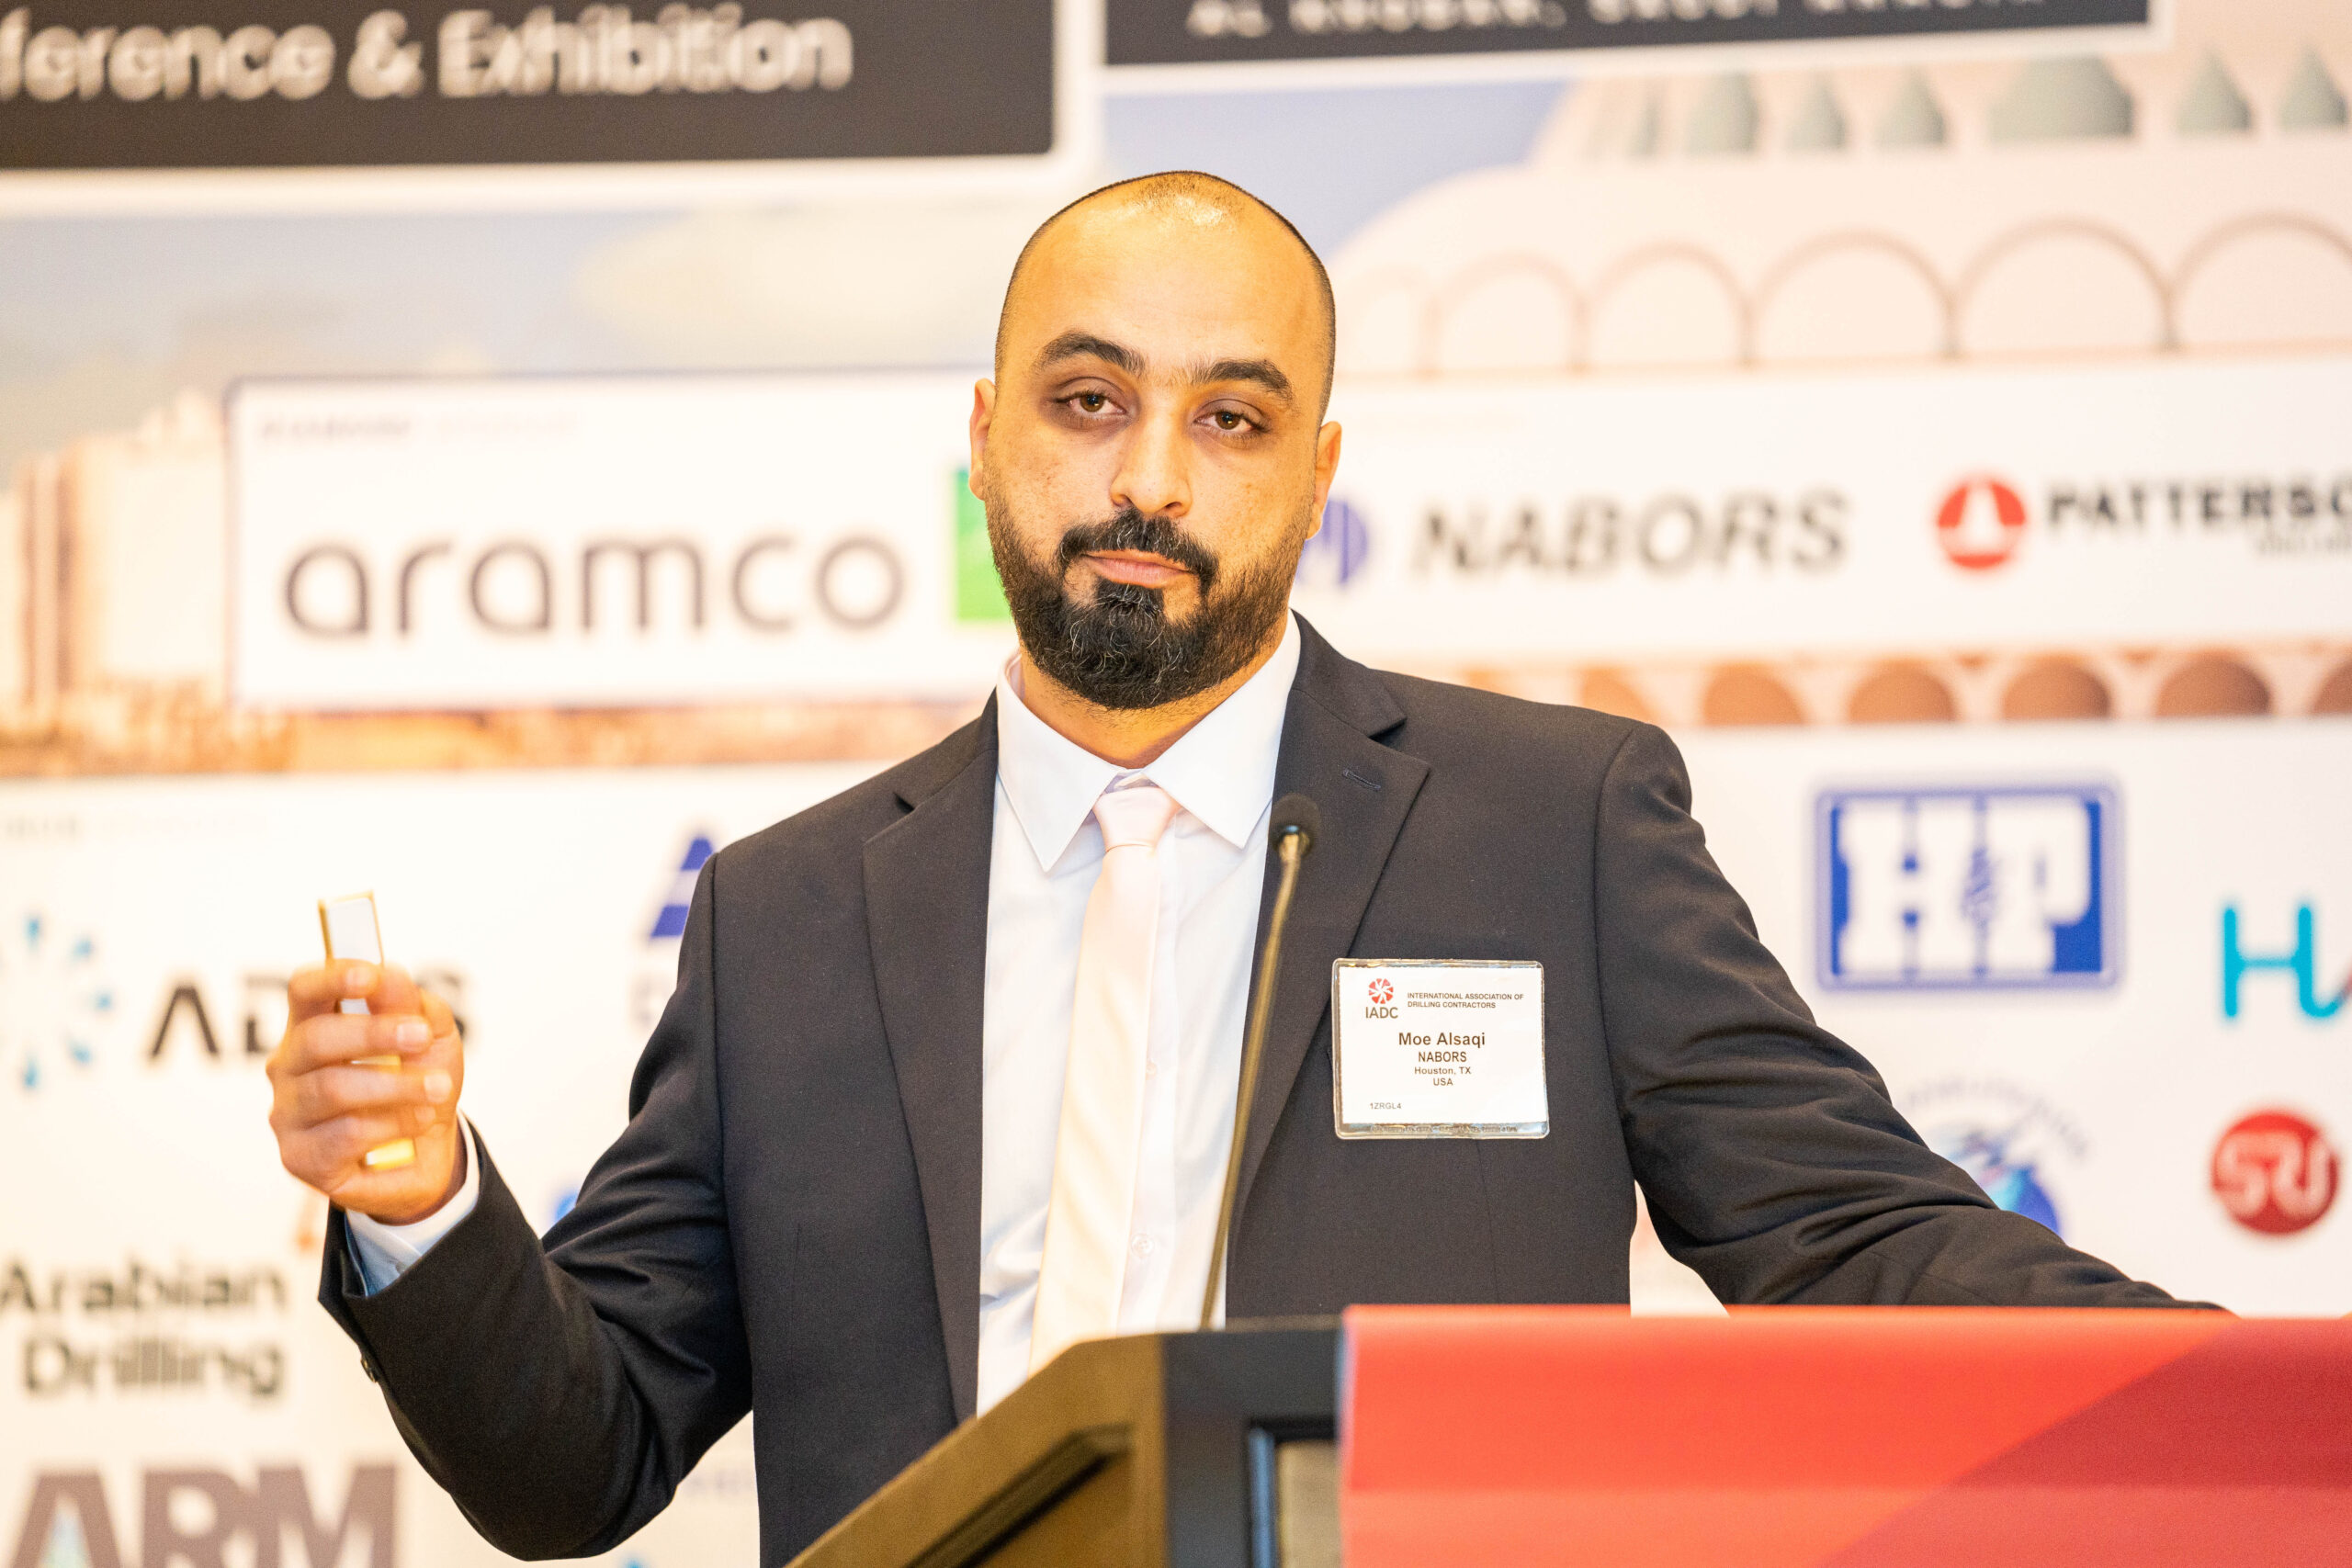 Moe Alsaqi speaks at the IADC Drilling Middle East 2023 Conference in Saudi Arabia